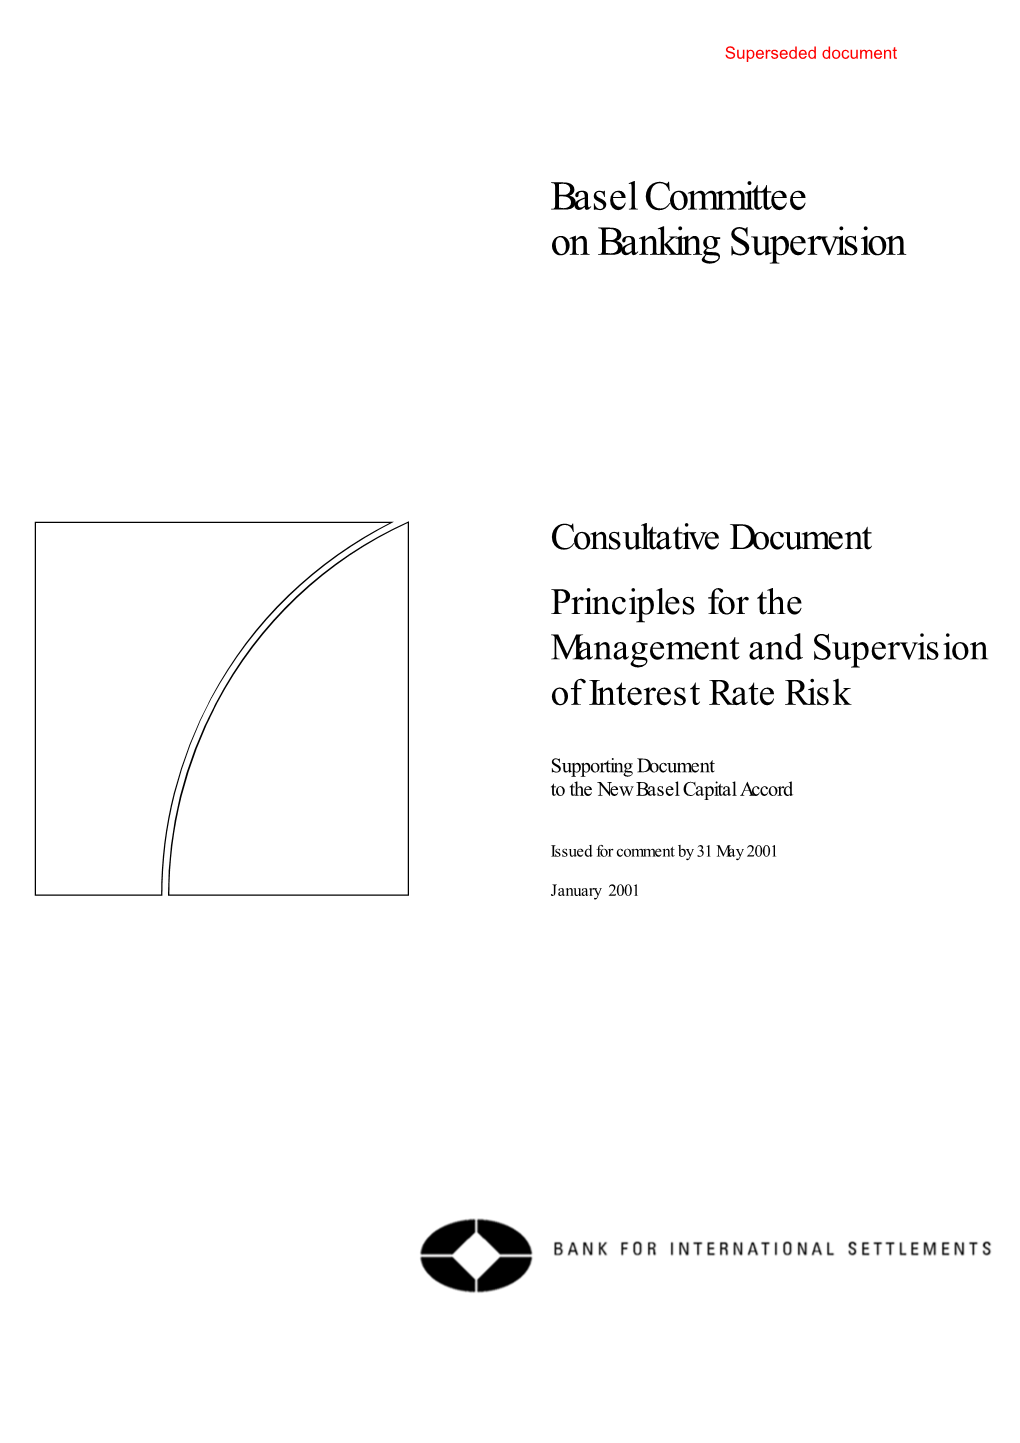 Principles for the Management and Supervision of Interest Rate Risk